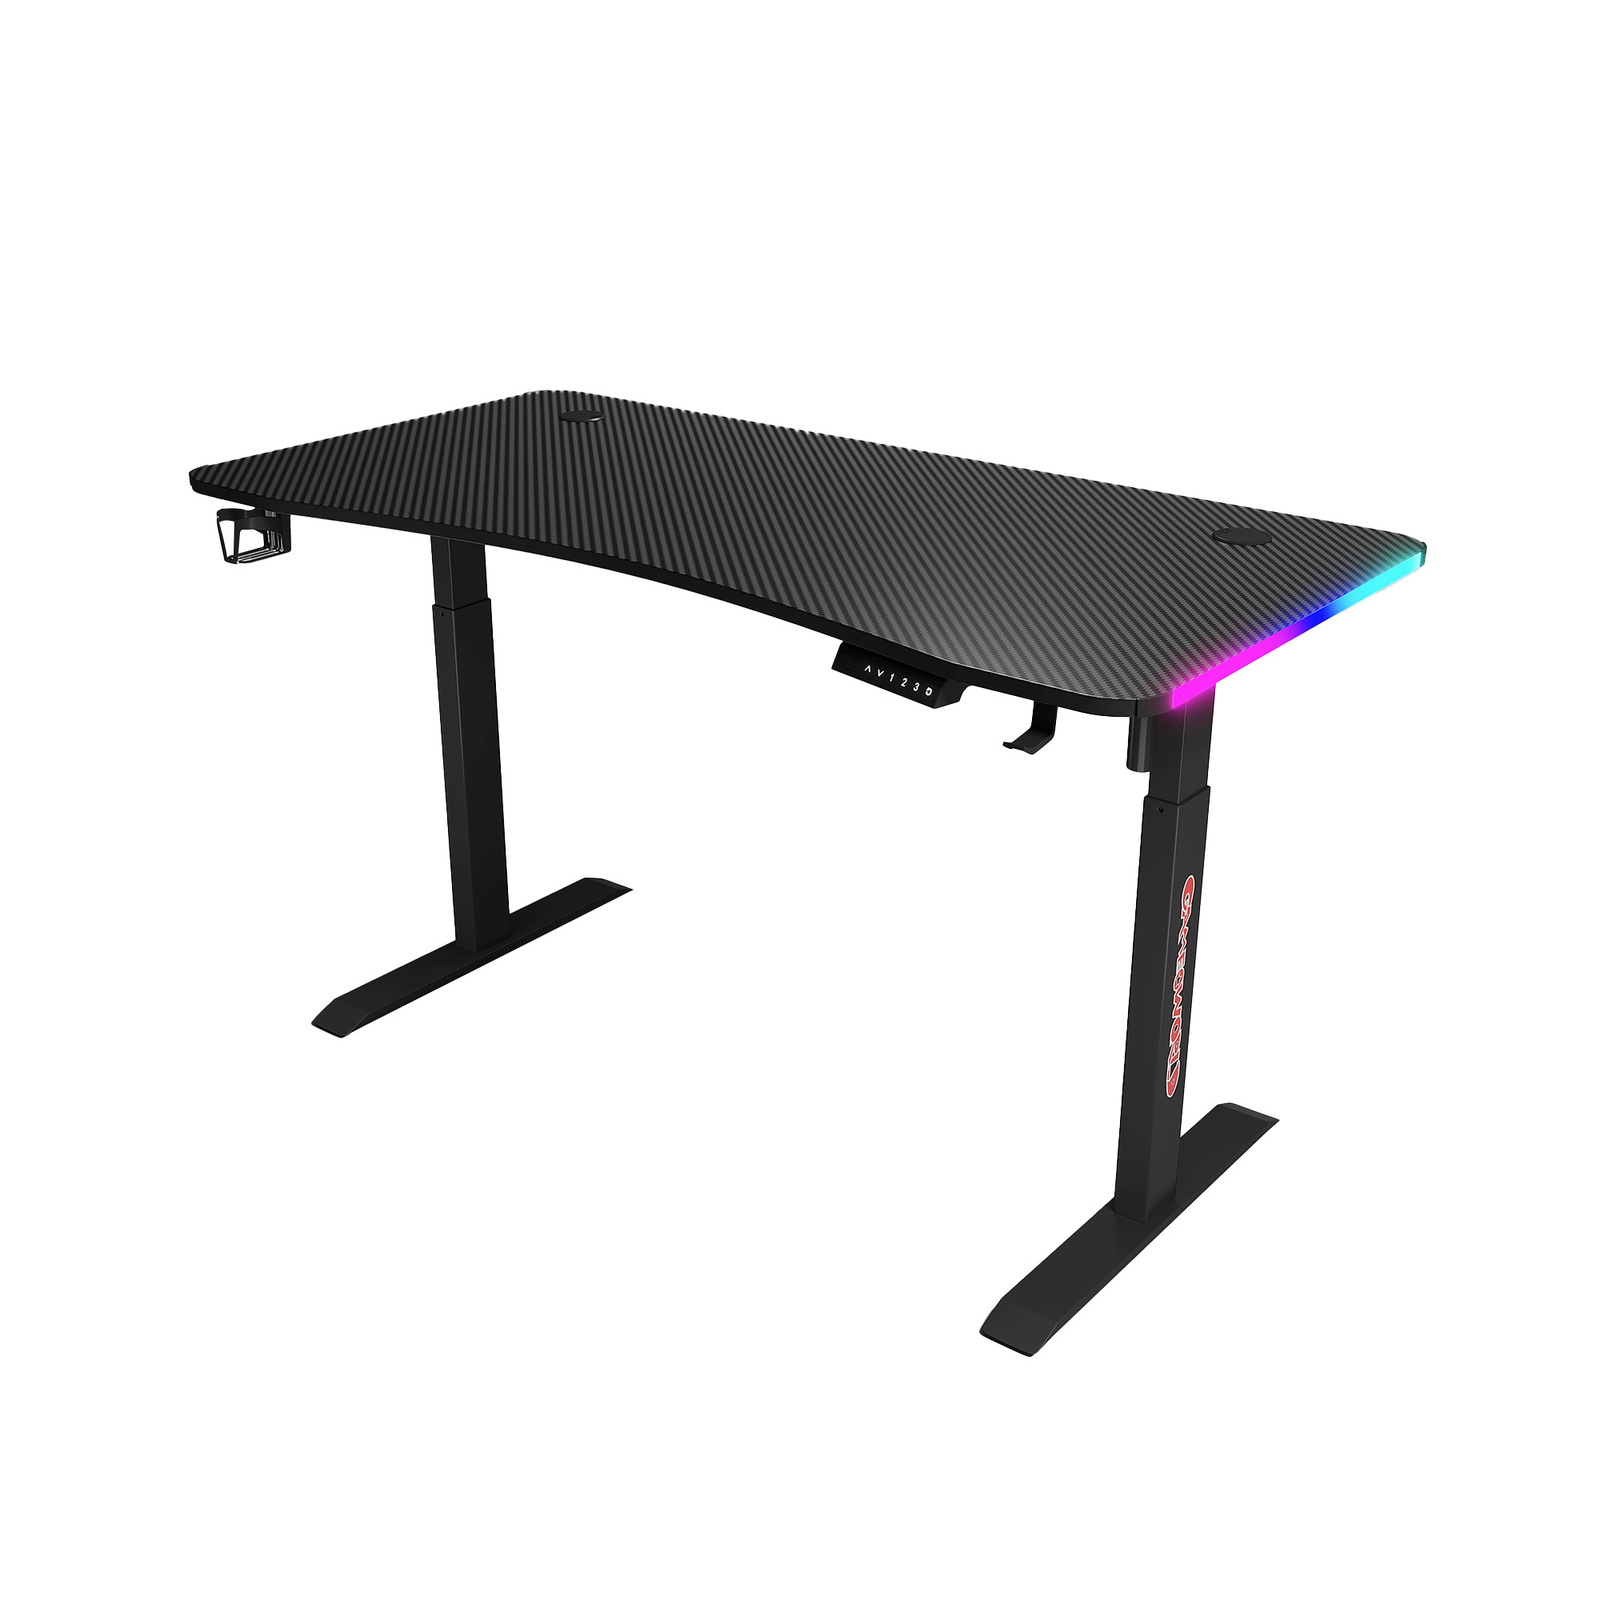 140cm RGB LED Gaming Desk Single Motor Frame Leg with Cup and Headphone Holder